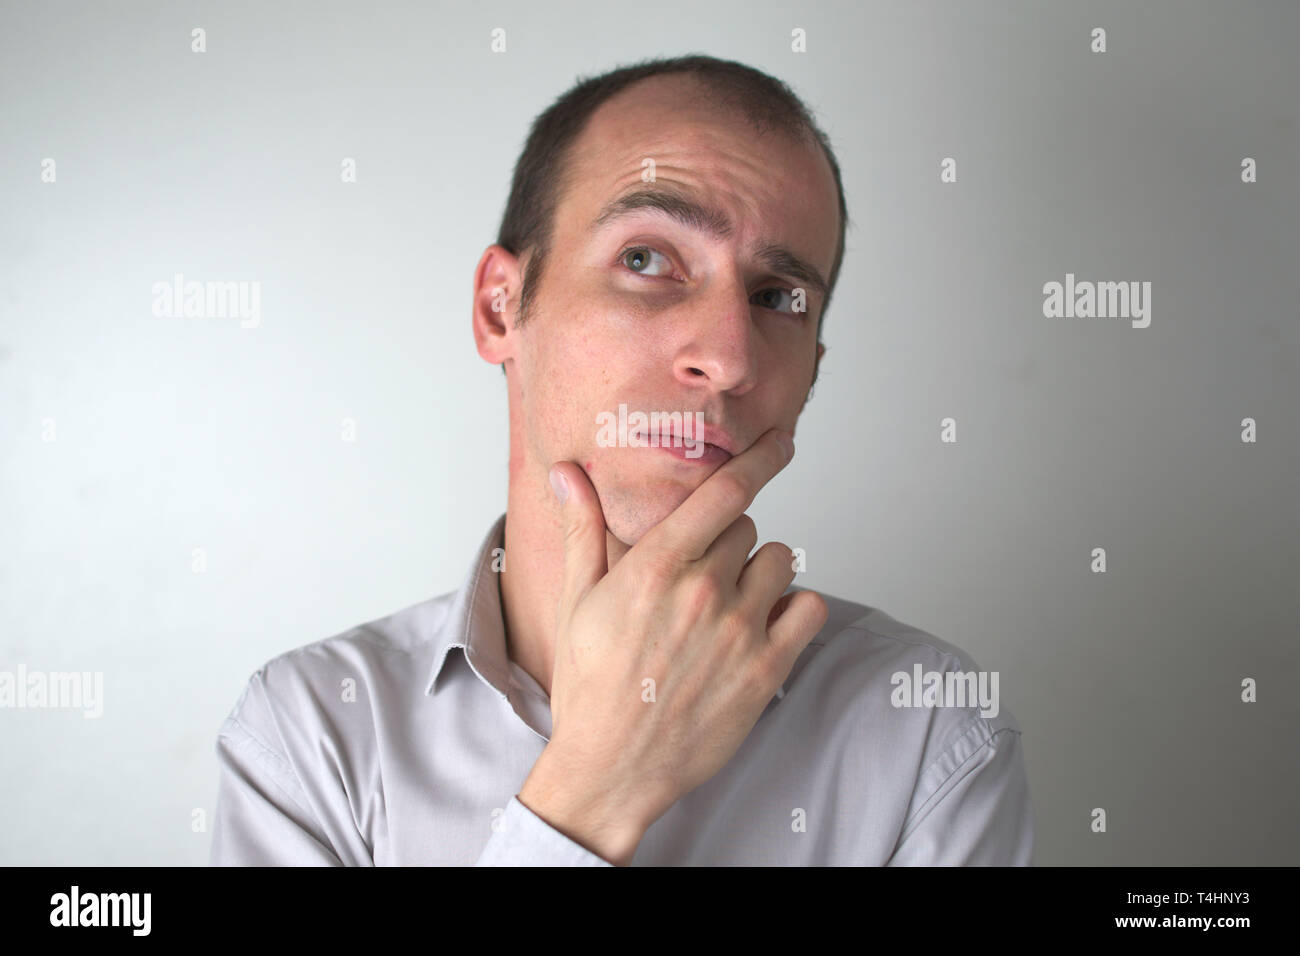 Sudio shot of a man with a thoughtful expression. Stock Photo